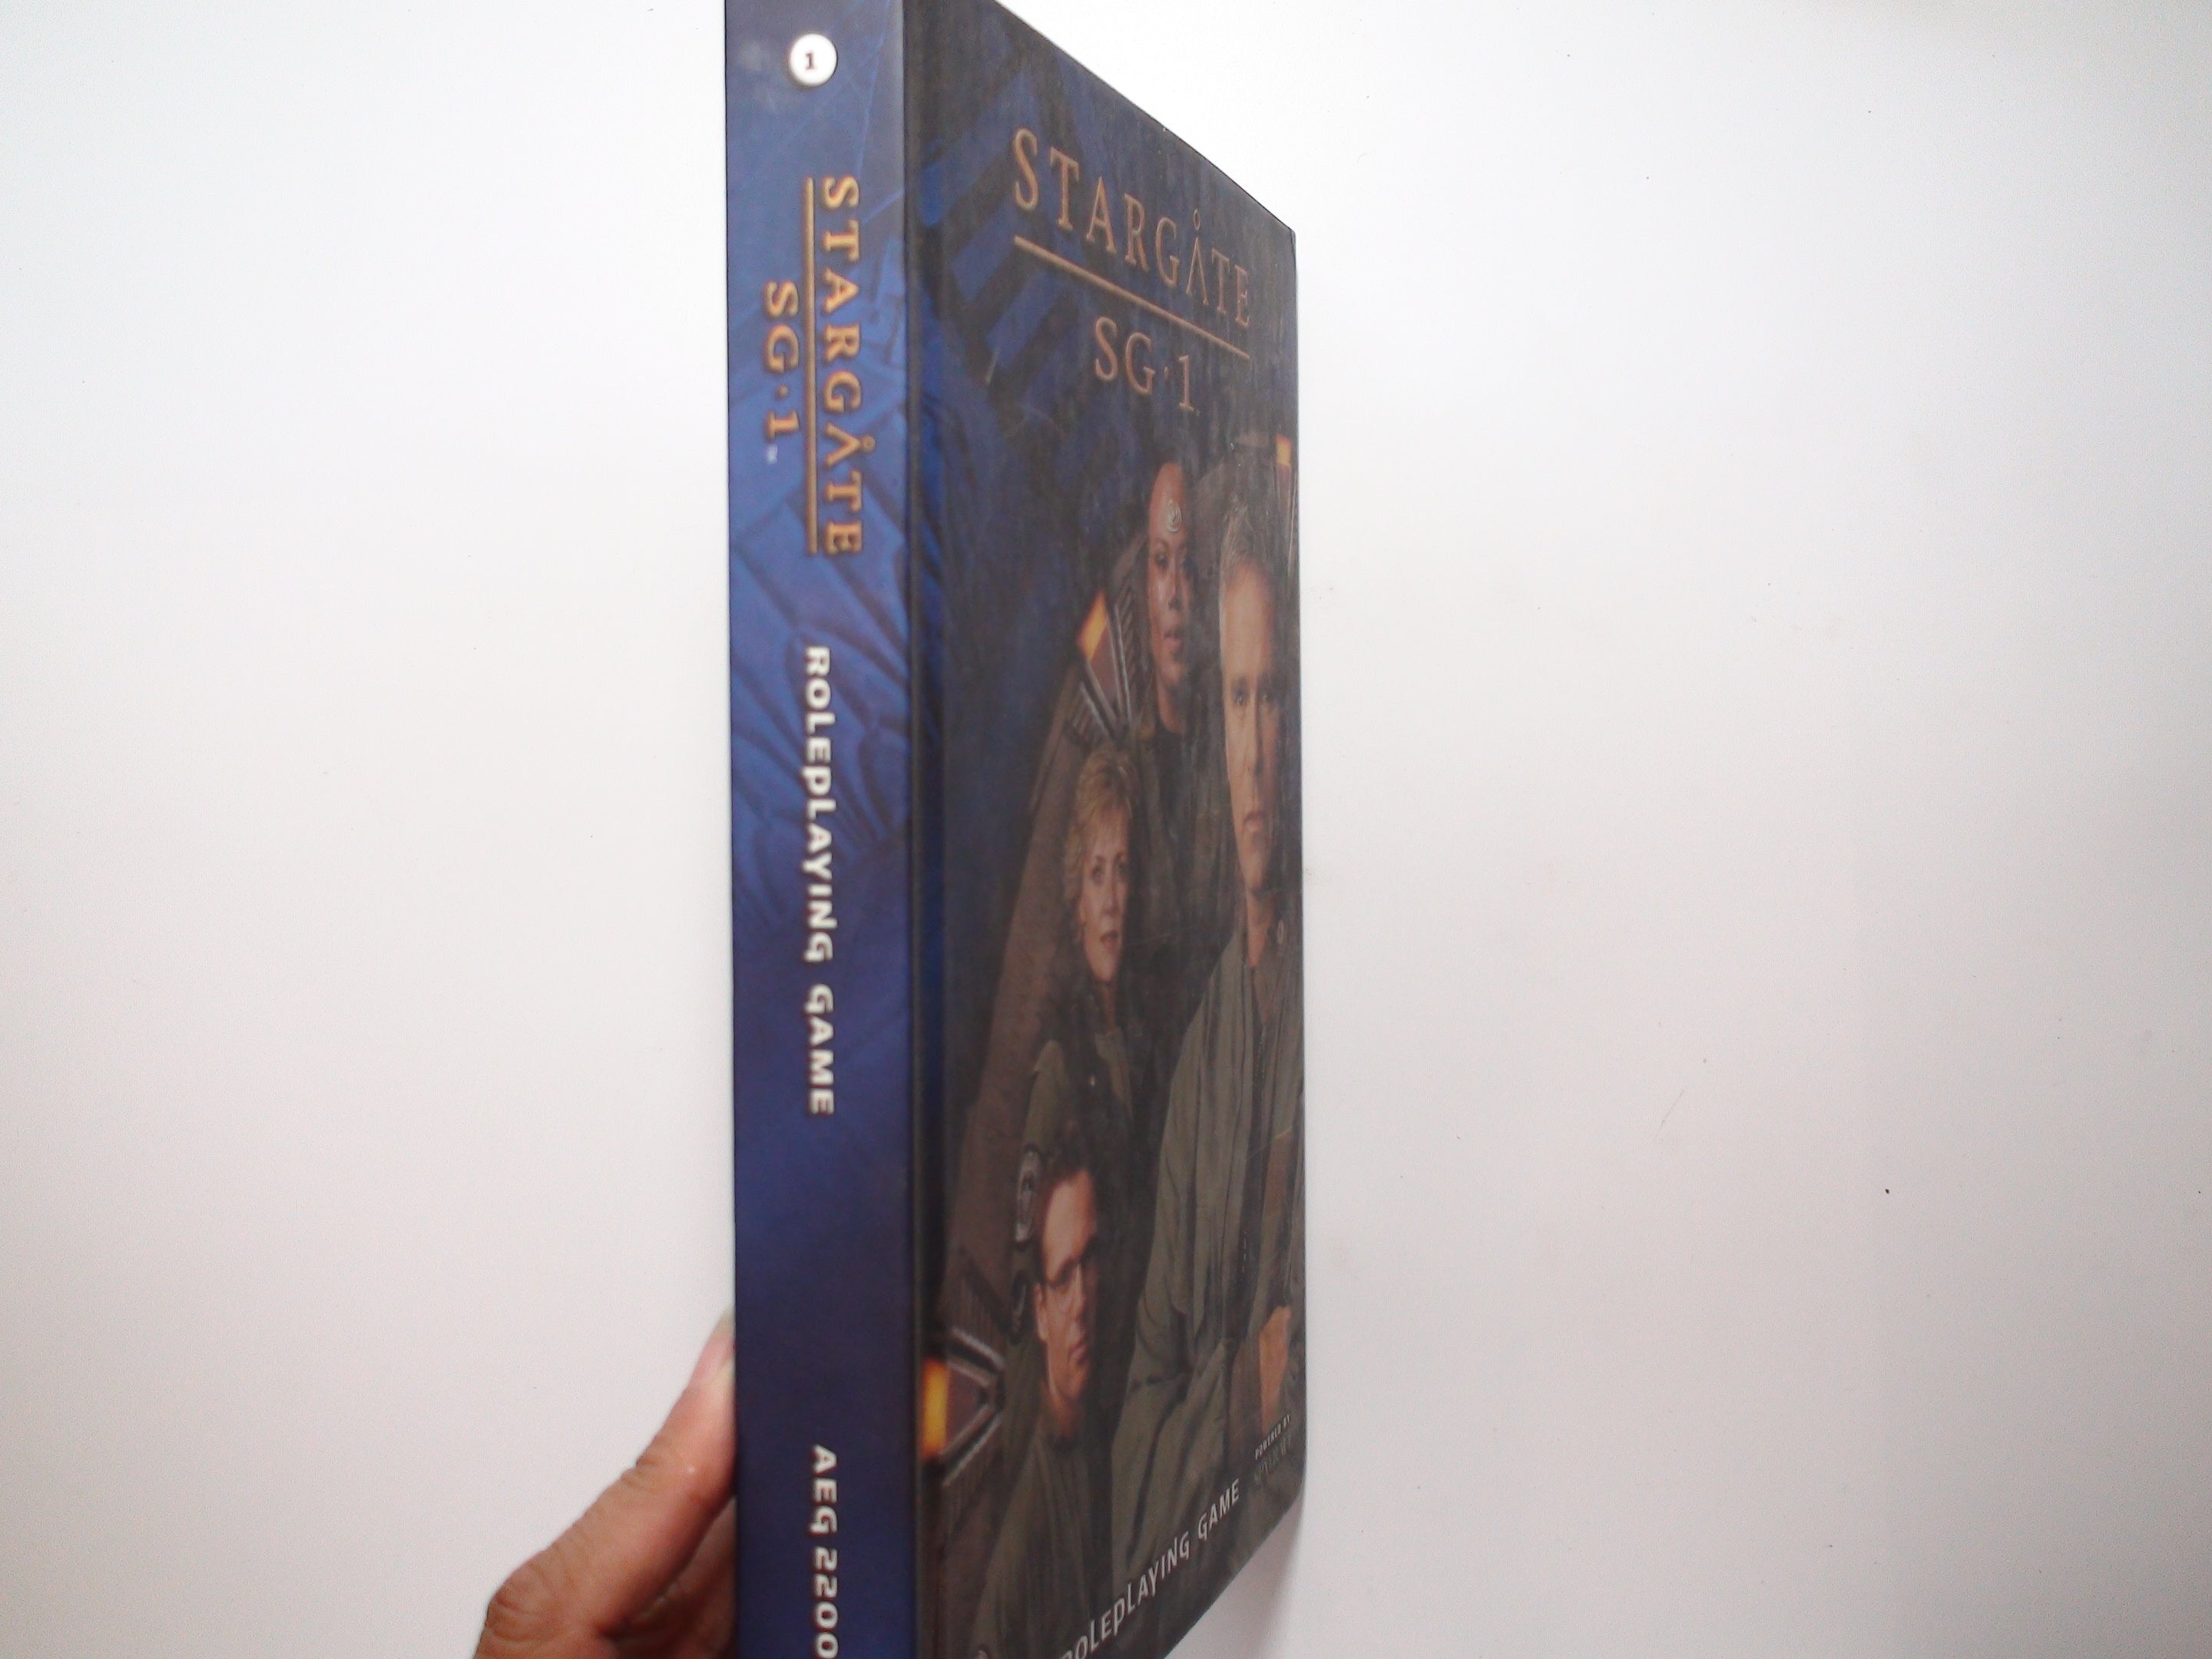 Stargate SG-1 Roleplaying Game Core Rulebook, AEG 2200, D20, 1st Ed, 2003